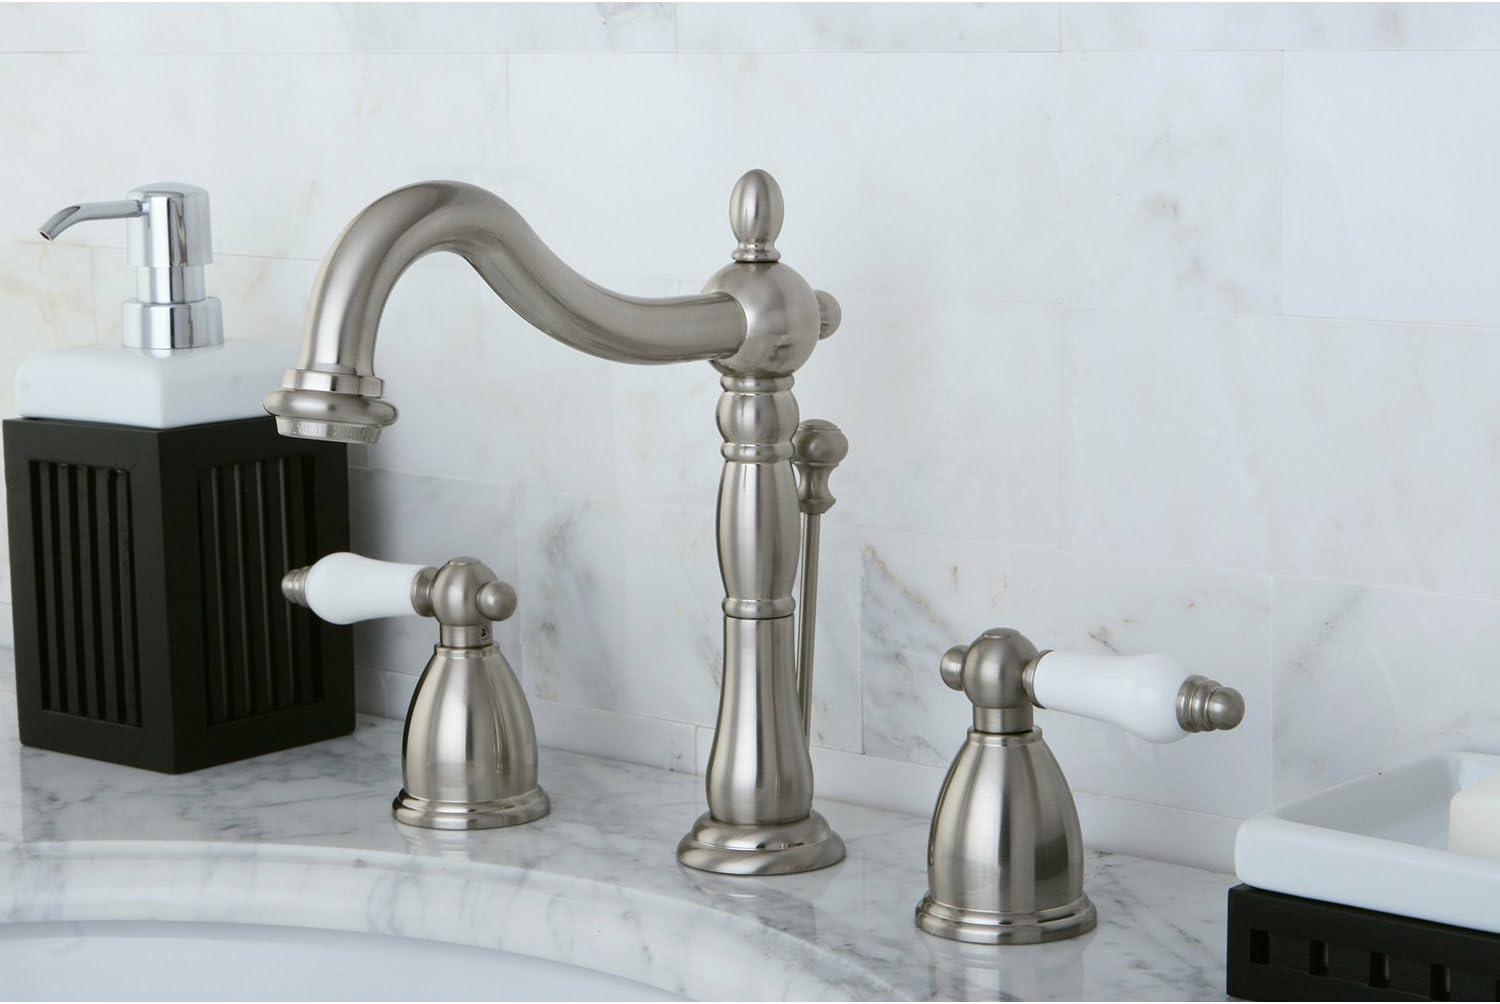 Heritage Brushed Nickel Widespread Lavatory Faucet with Porcelain Lever